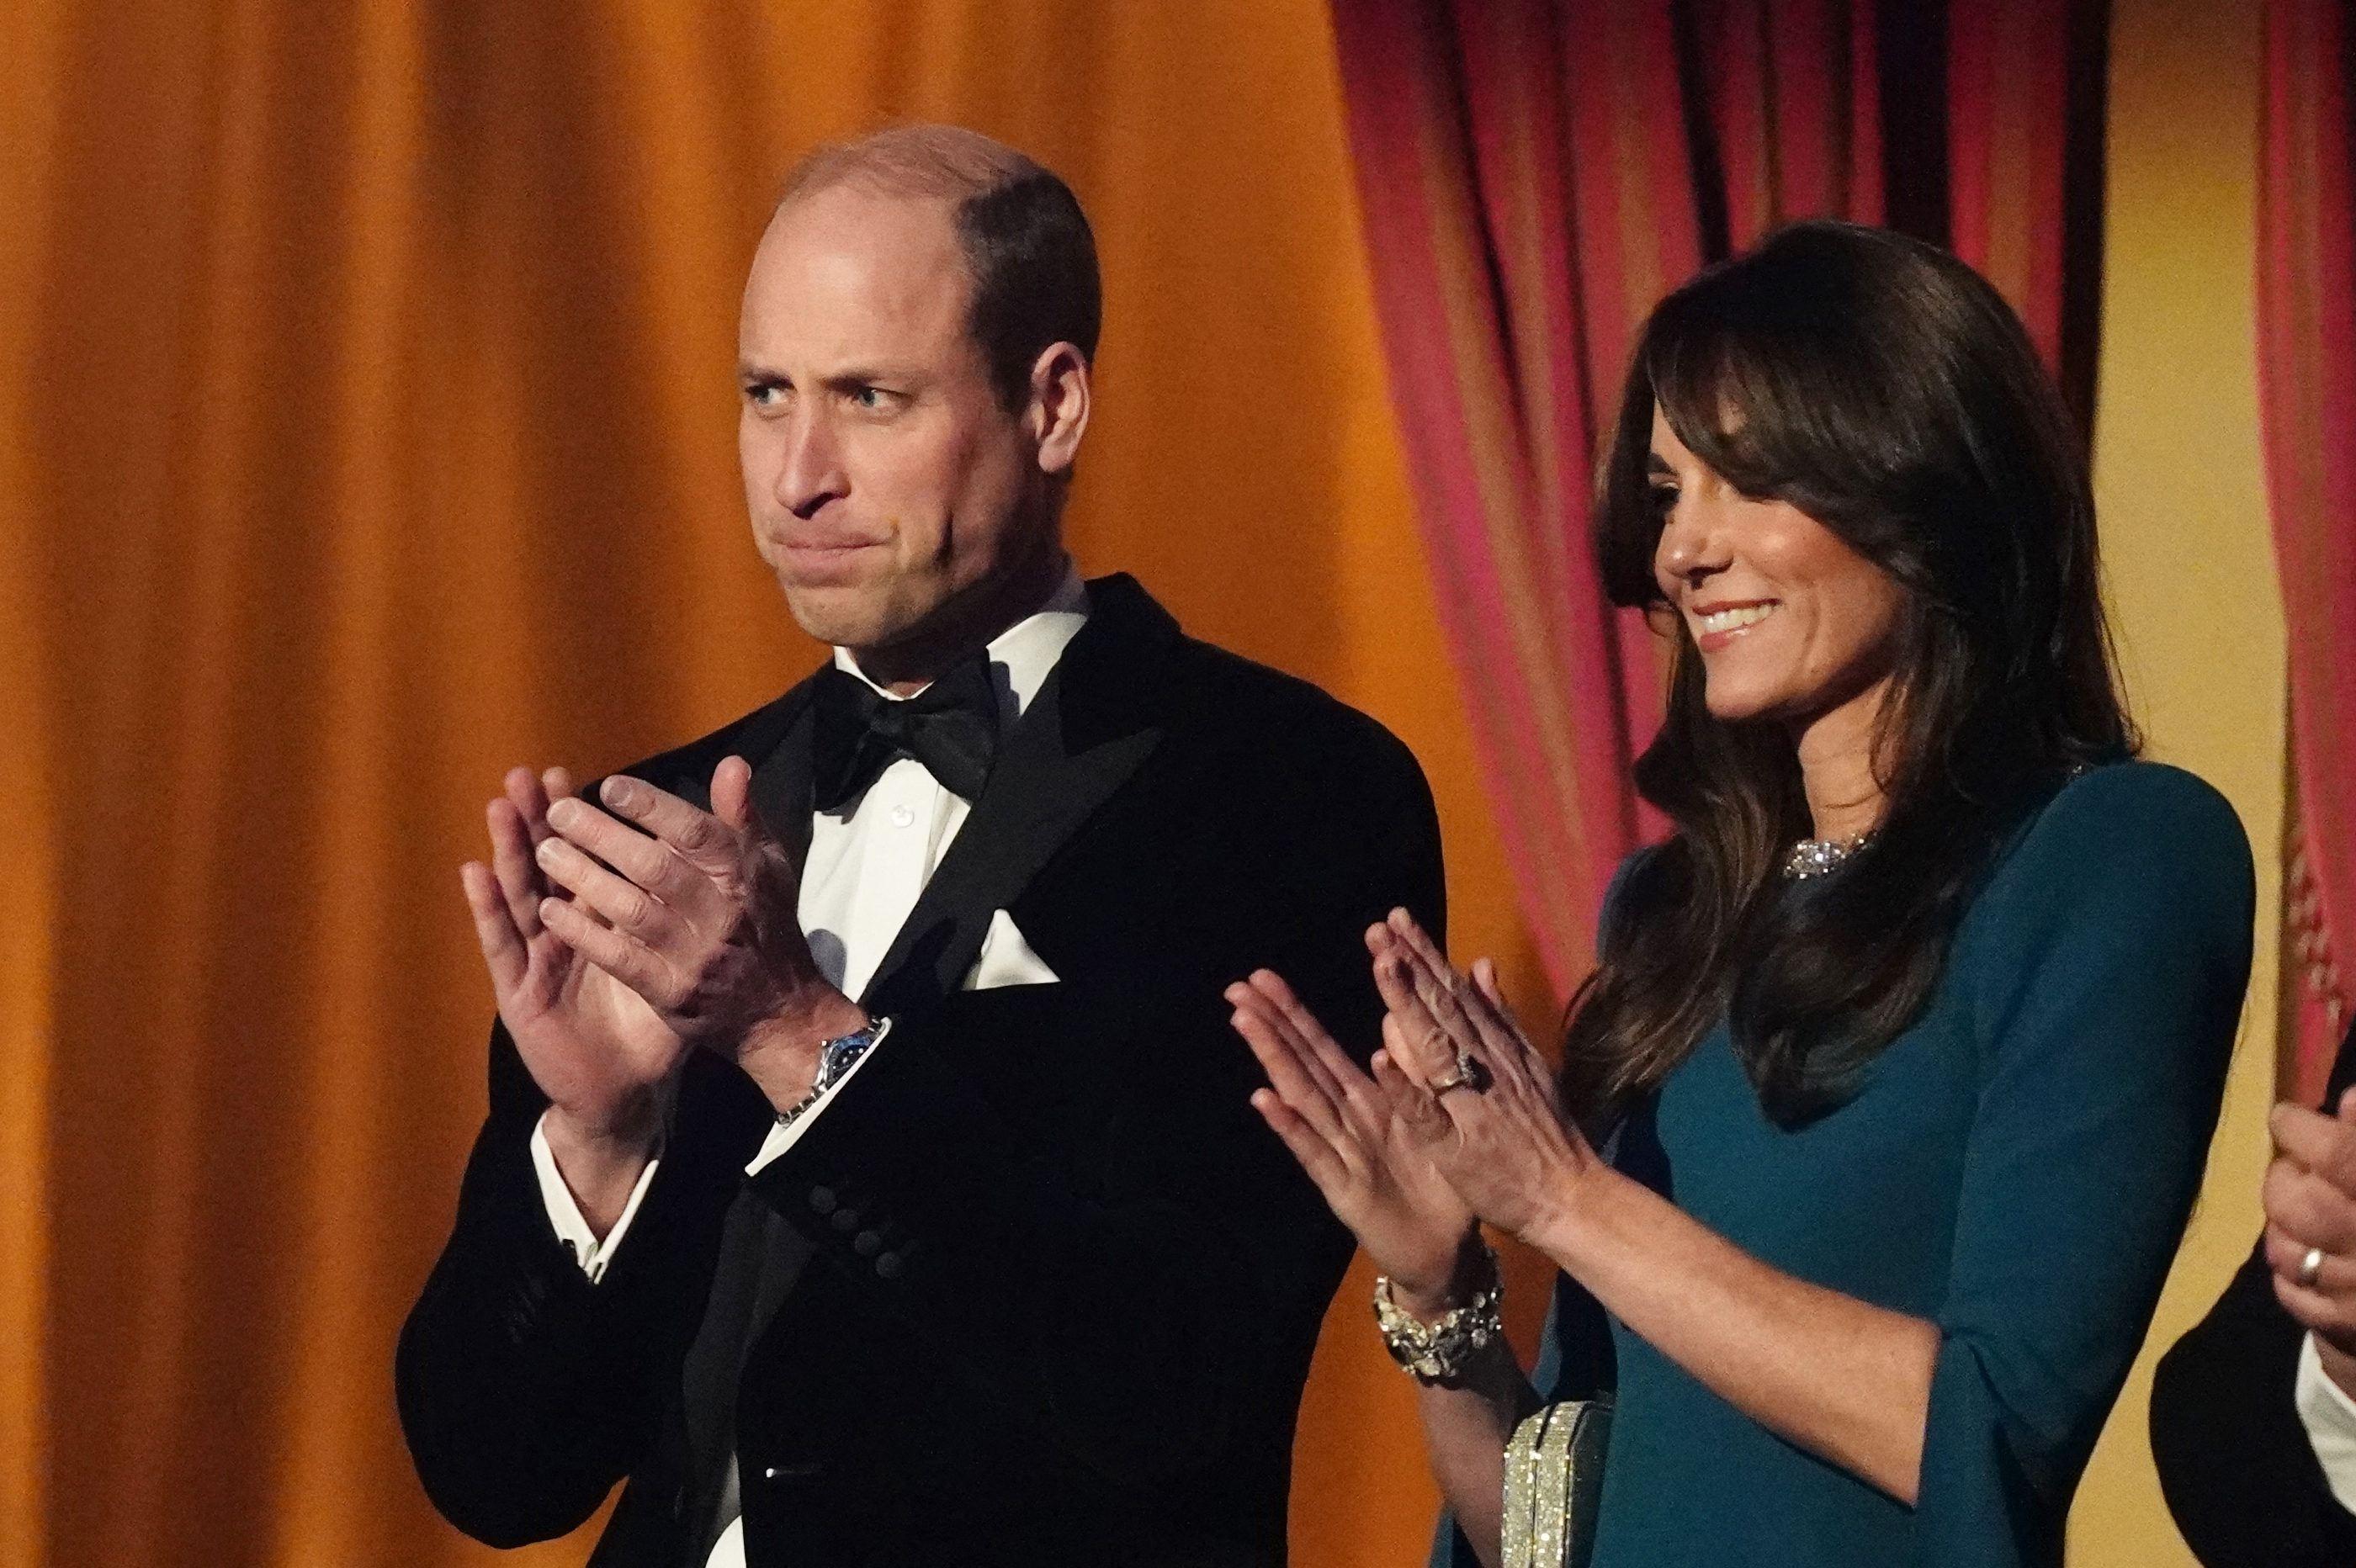 Princess Catherine and Prince William at the Royal Variety Performance at the Royal Albert Hall in London on November 30, 2023 | Source: Getty Images